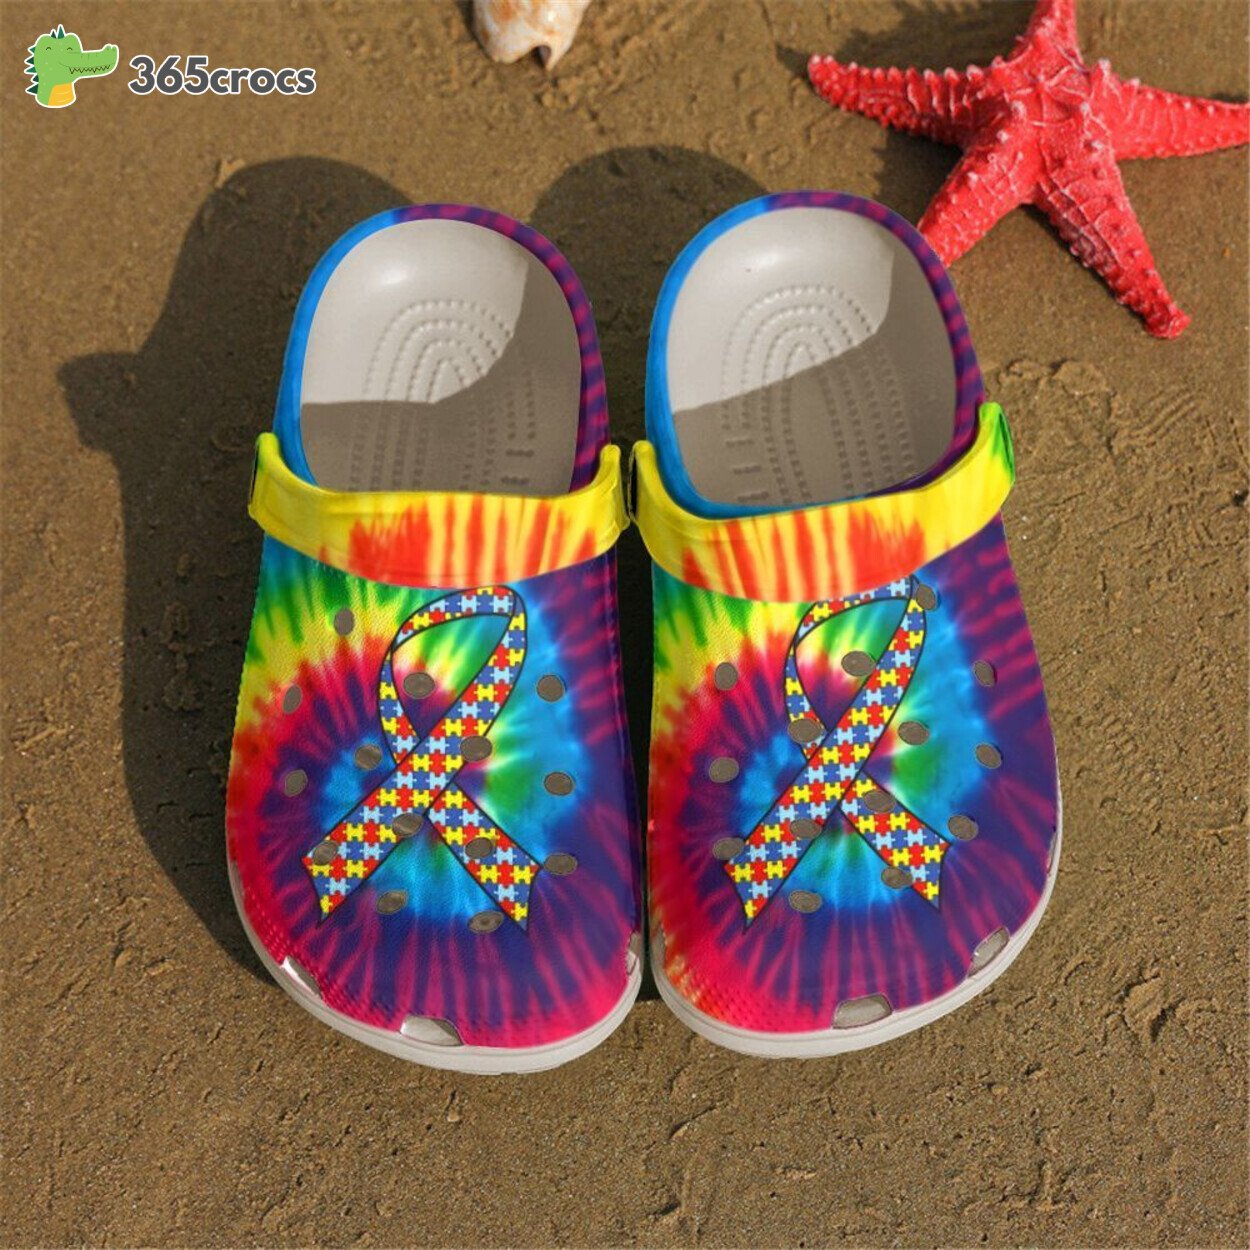 Ribbon Tie Dye Color Celebrating Autism Awareness on Classic Clog Shoes